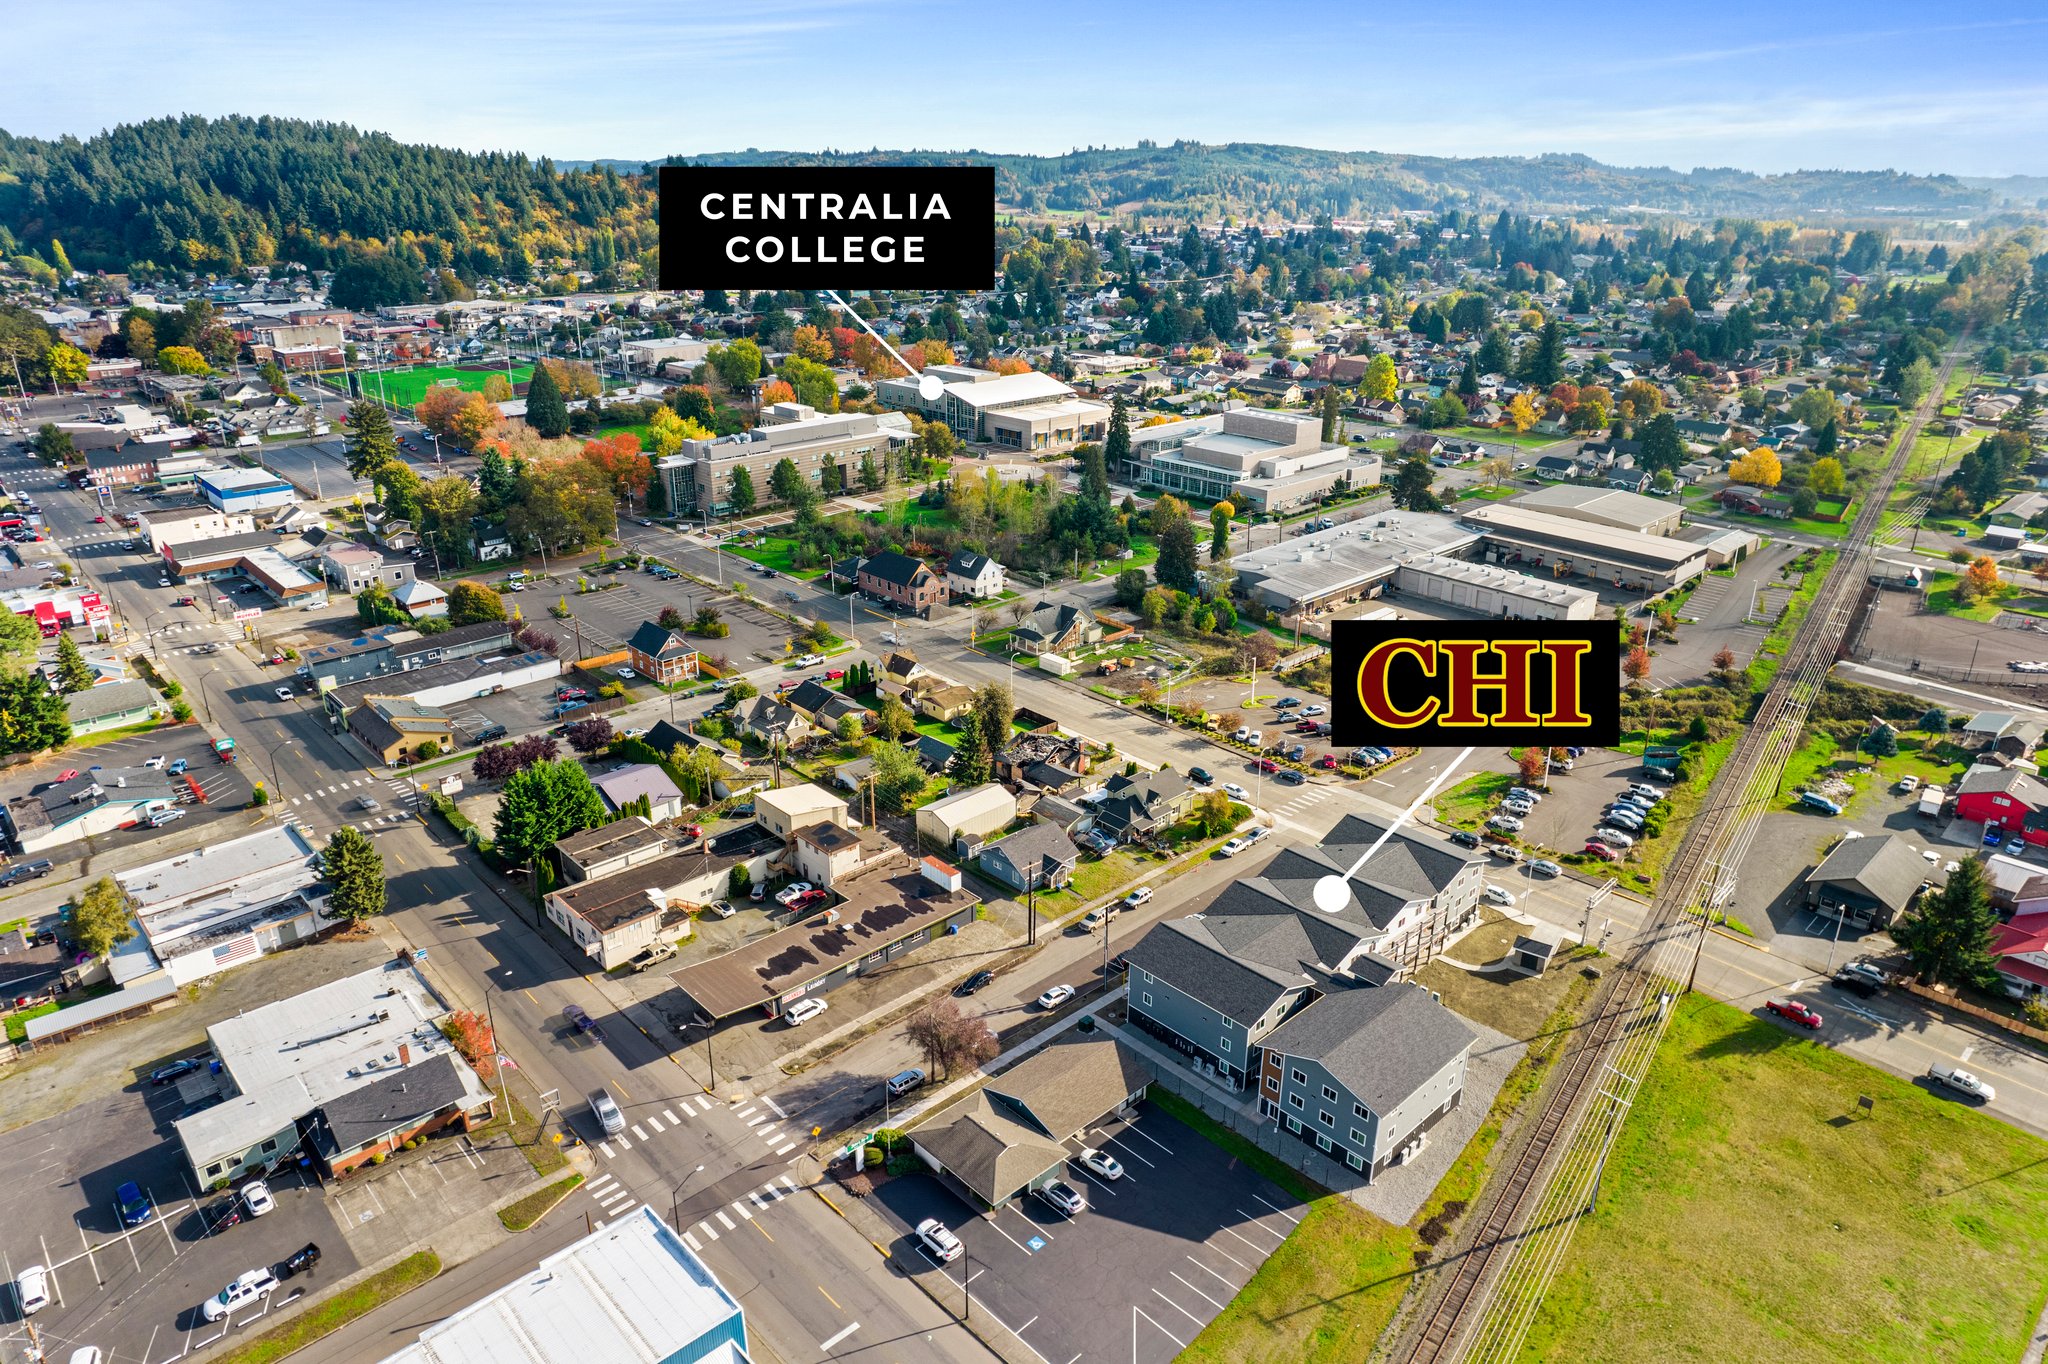 Aerial view showing that CHI is right next to Centralia College.